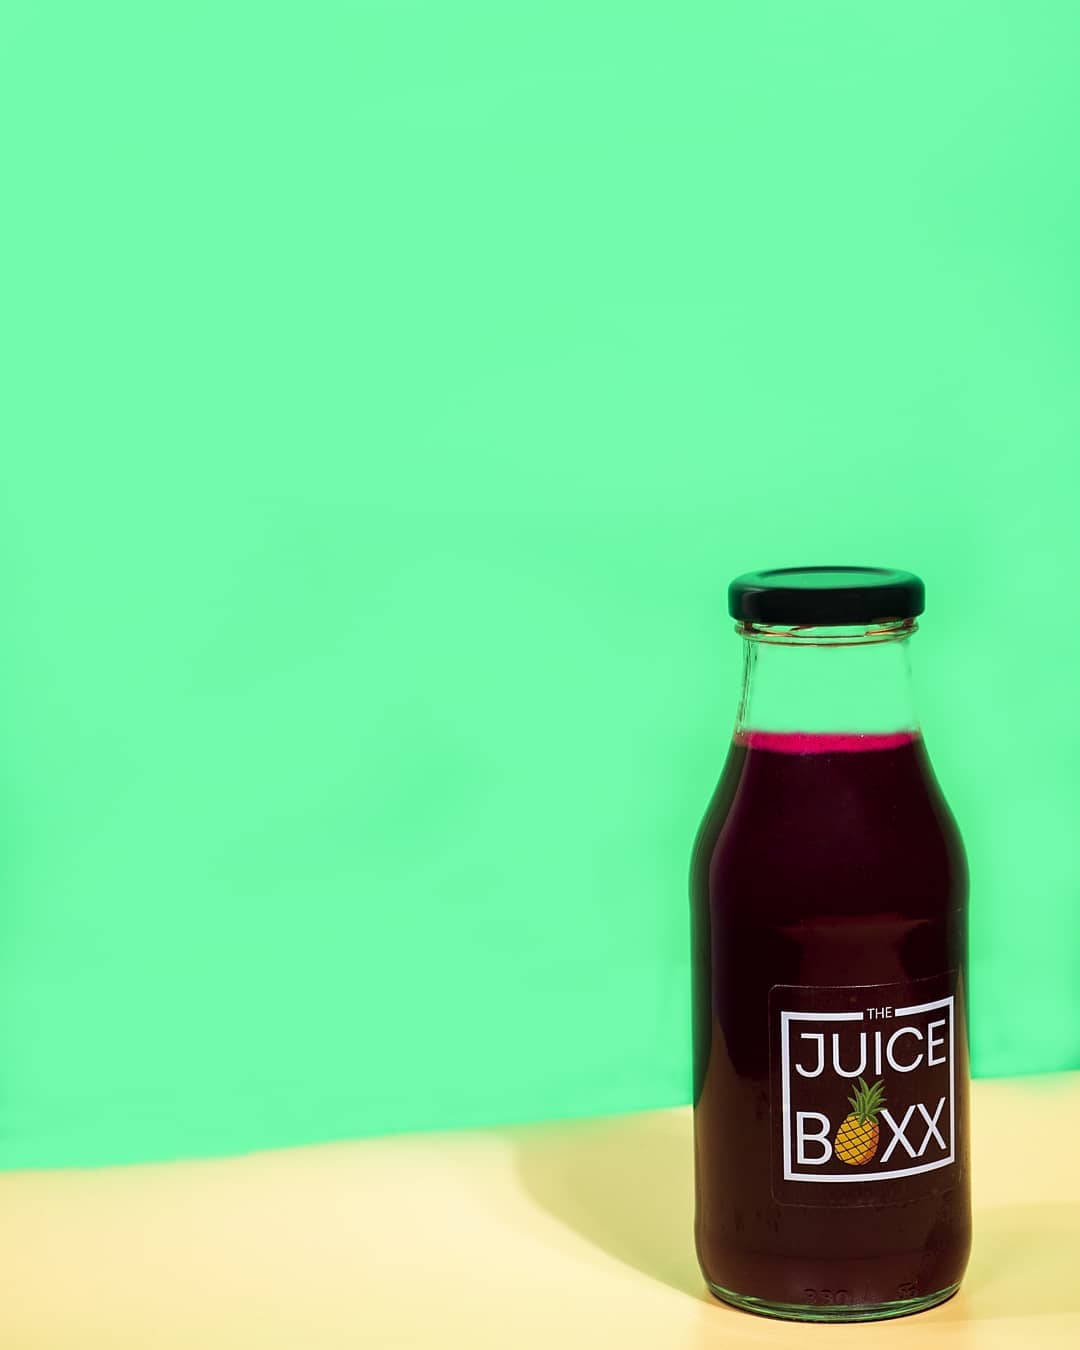 thejuice_boxx bottle green